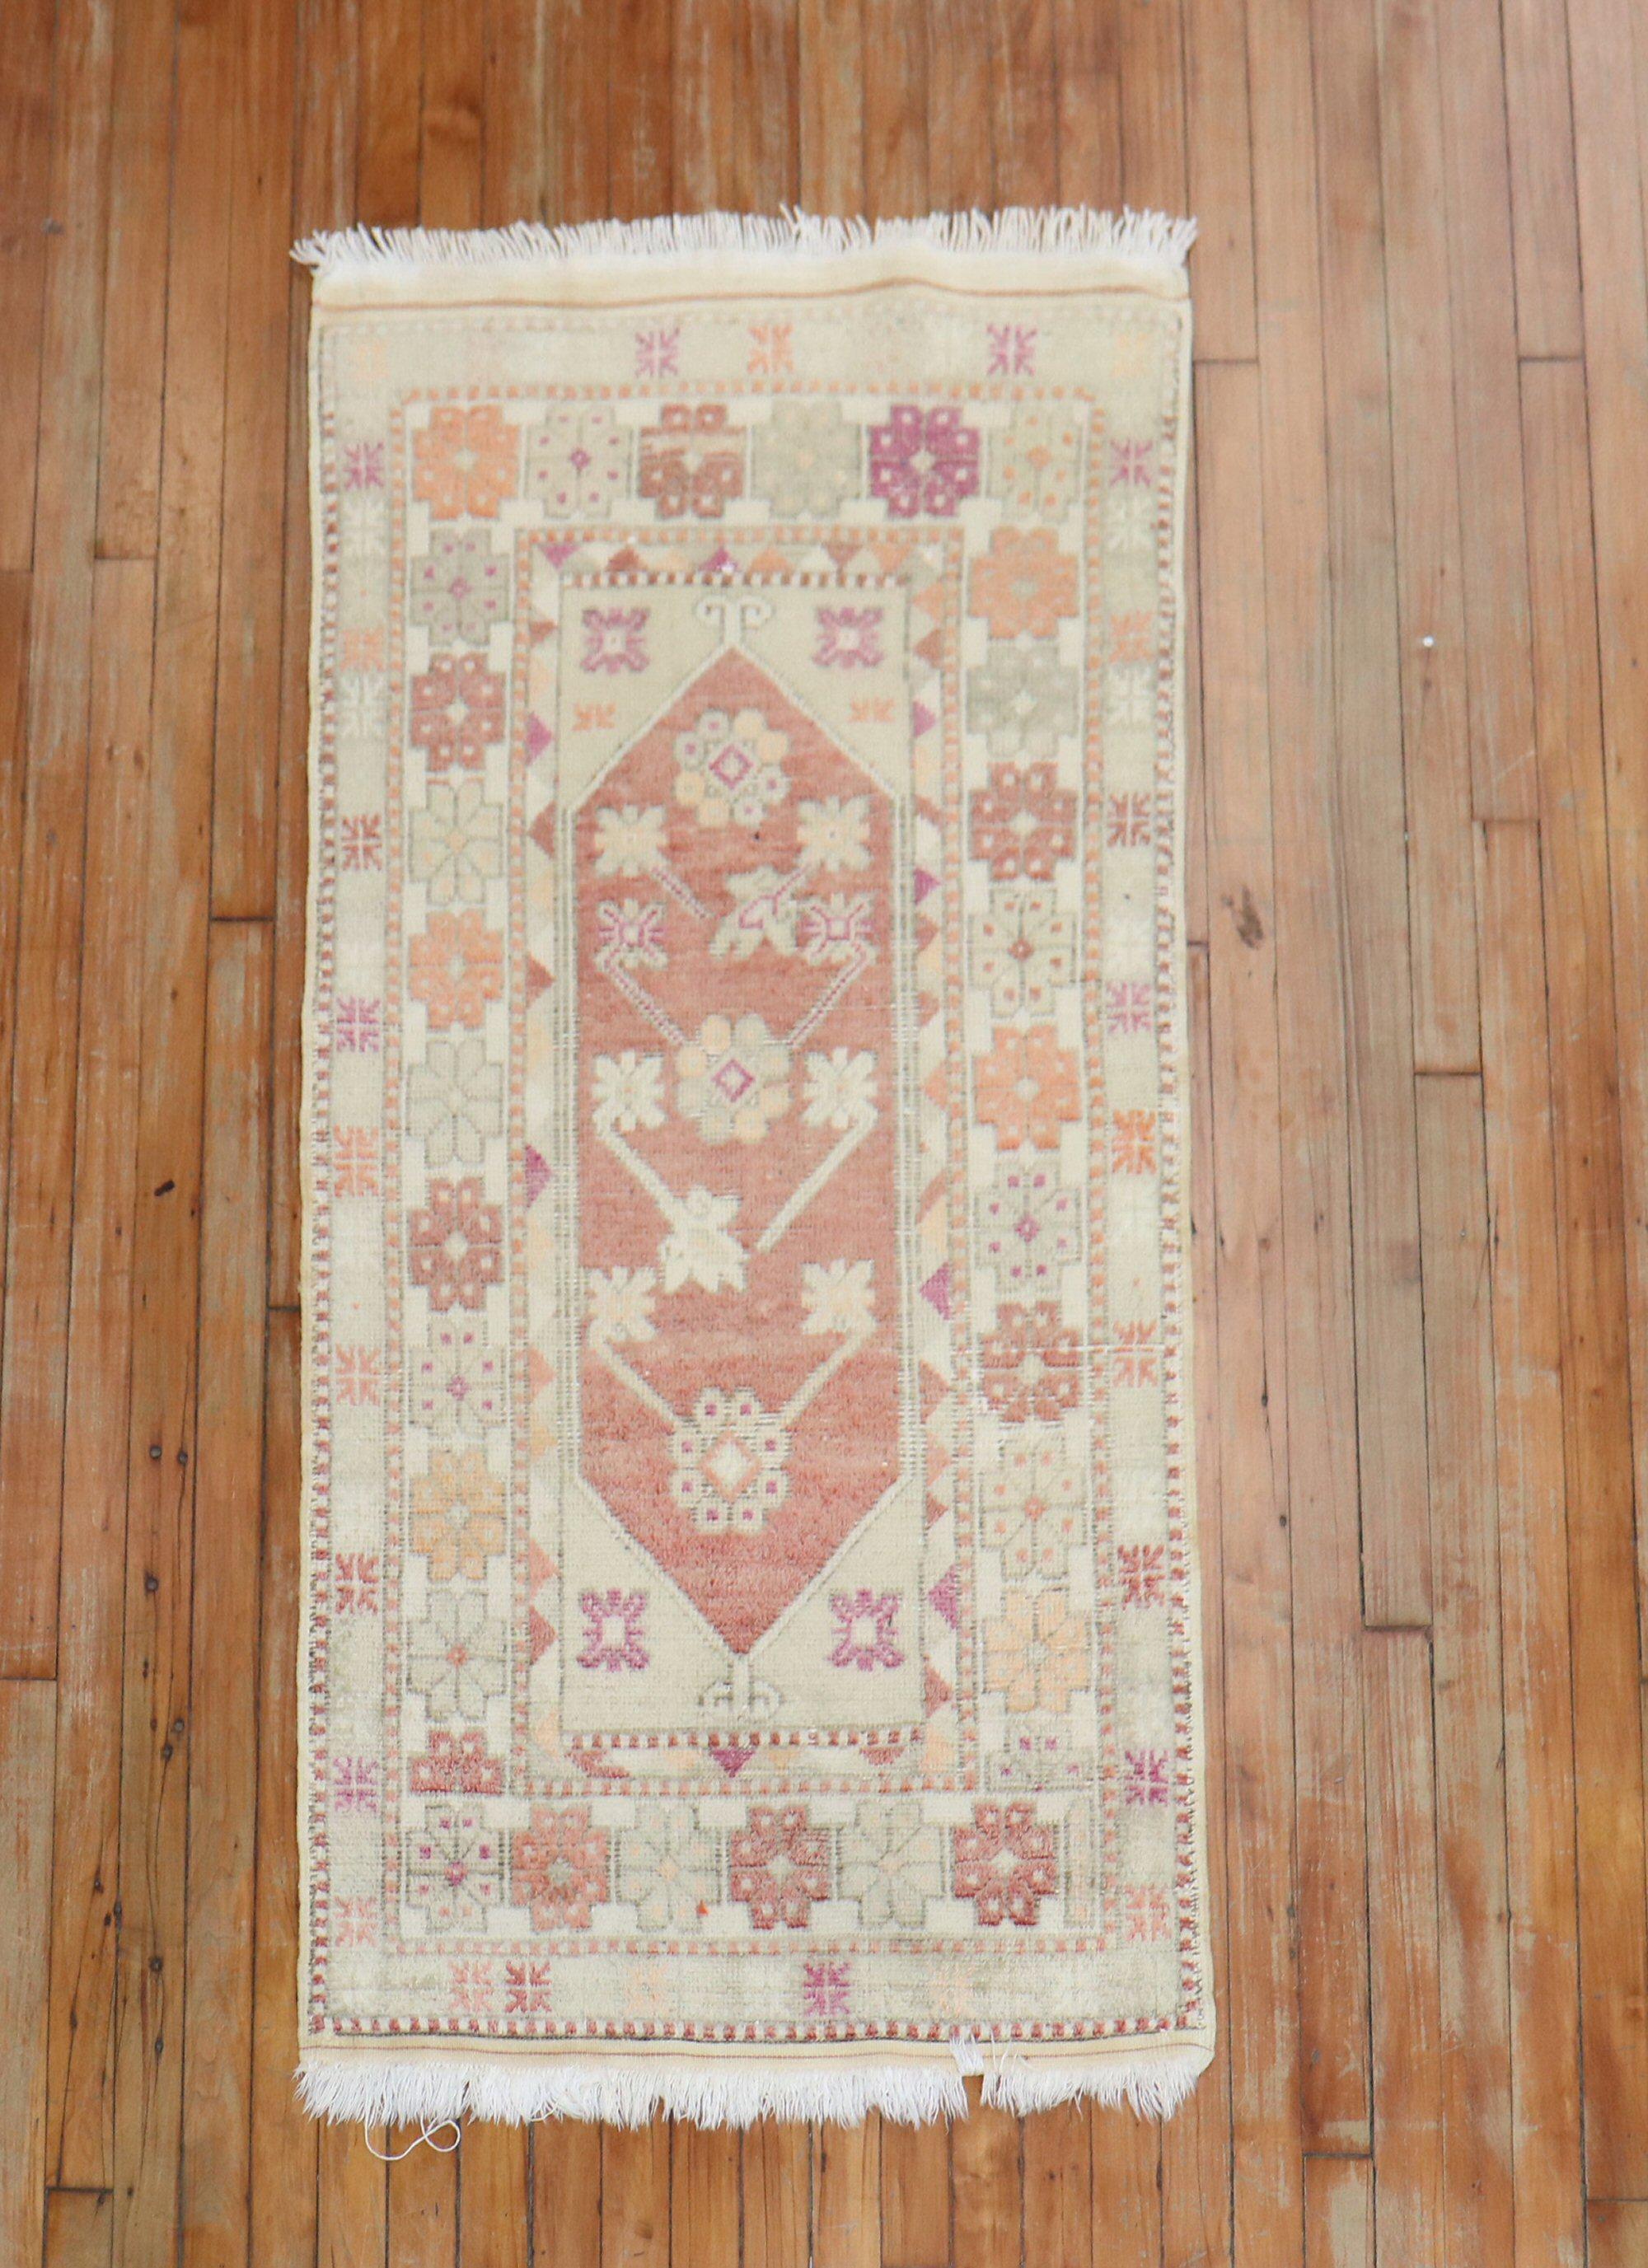 Subtle Turkish Anatolian floral pattern rug from the 20th century

Measures: 2'6'' x 5'3''.